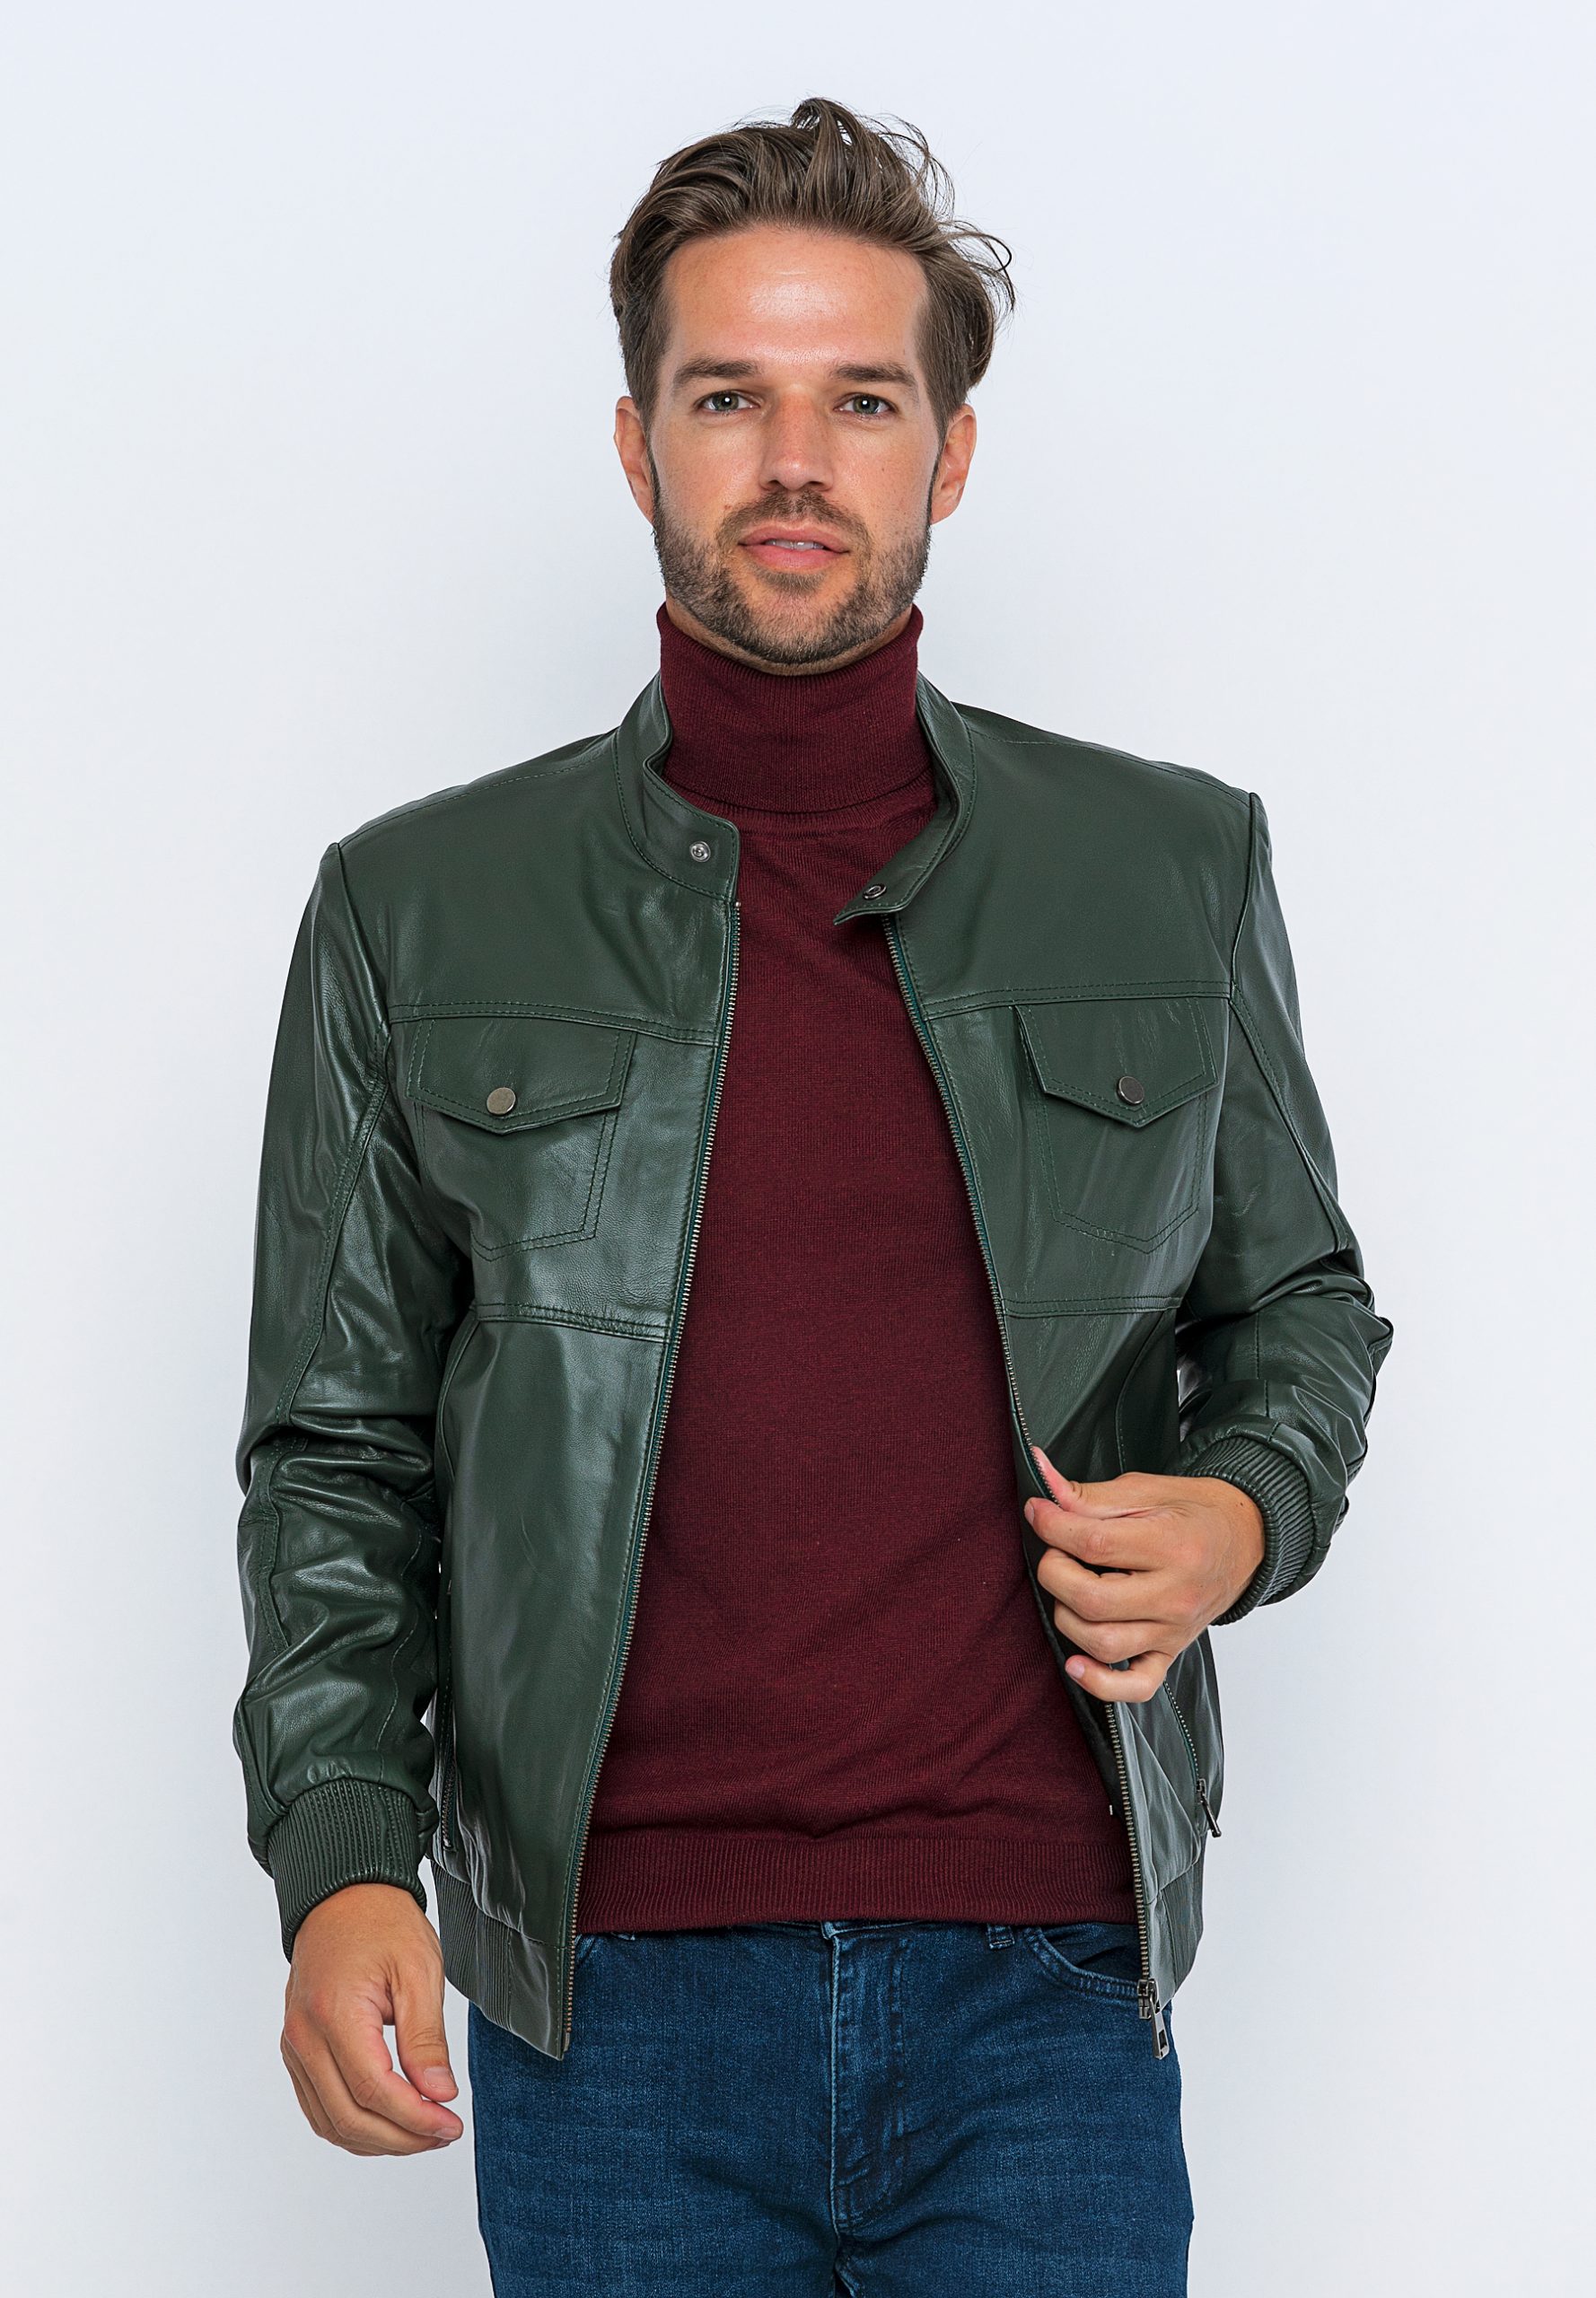 Leather Jackets in the color green for Men on sale | FASHIOLA INDIA